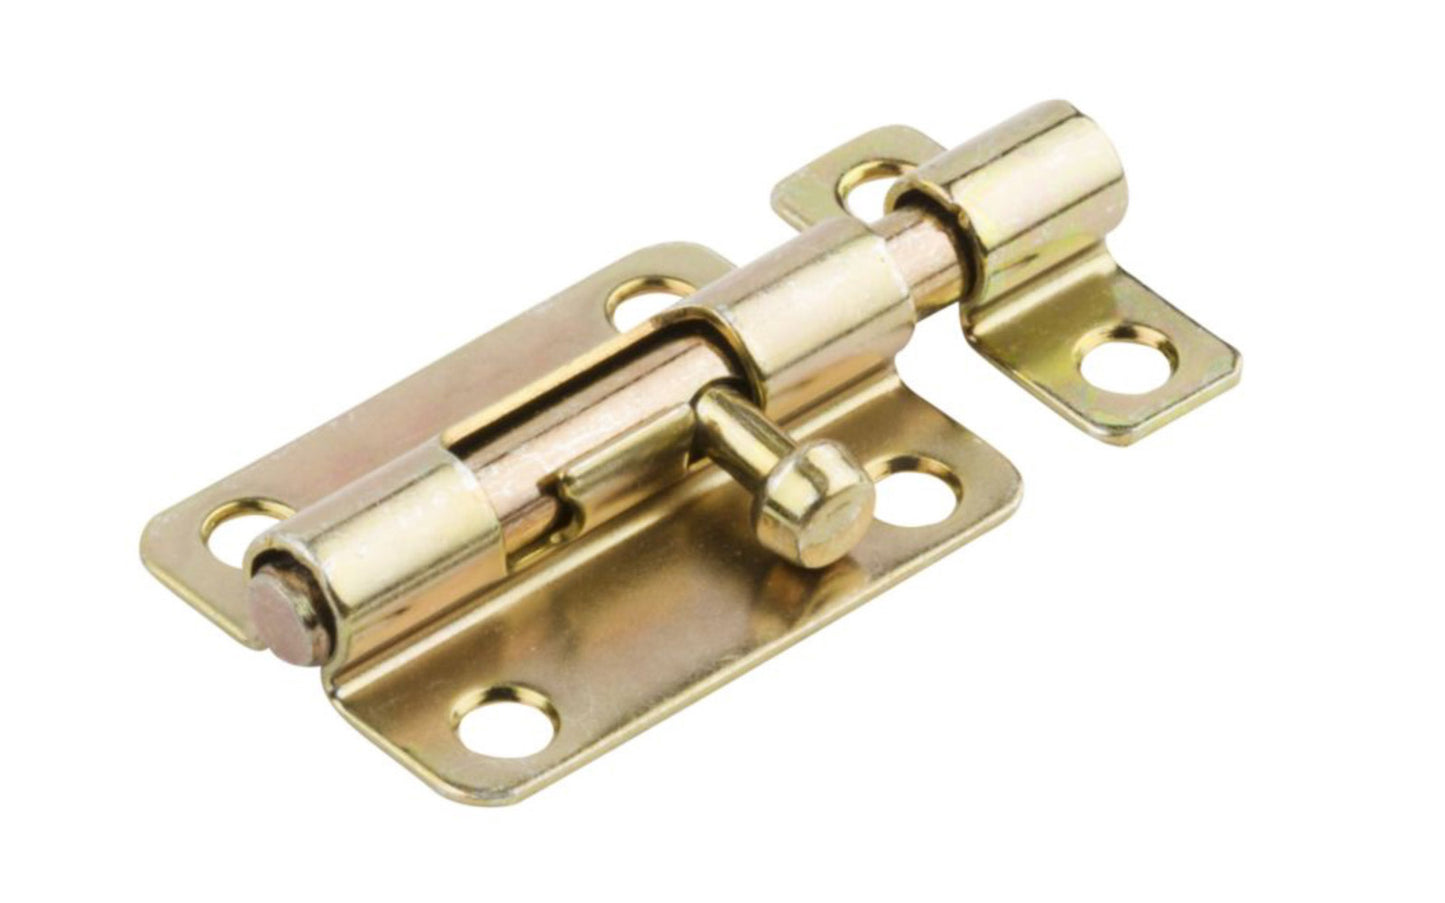 3" Brass-Plated Finish Barrel Bolt is designed for security applications on lightweight doors, chests, & cabinets. Use on vertical, horizontal, left or right hand applications. Includes six satin brass phillips screws. 3" width x 1-1/2" height. National Hardware Model No. N151-589.  